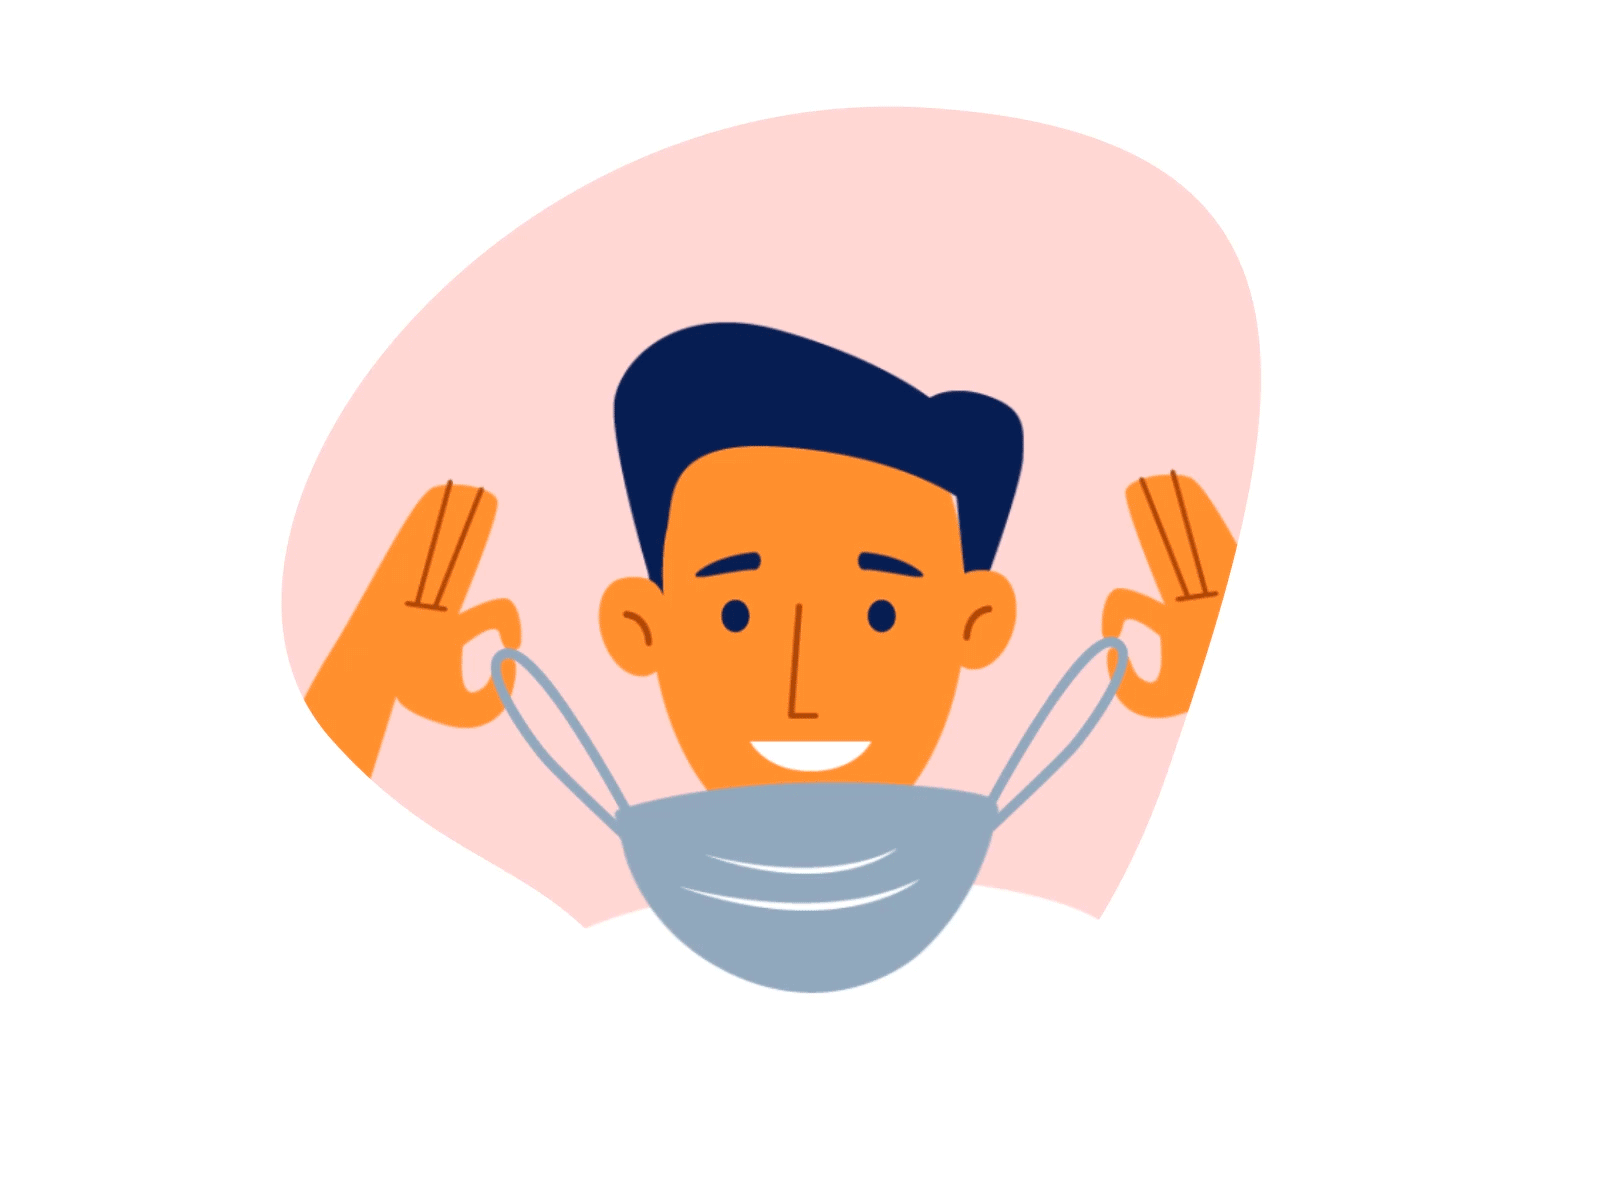 Character Animation #03 Covid-19 mask after effects animation animation 2d character character animation character design covid covid 19 design flat illustration minimal ui vector welcome